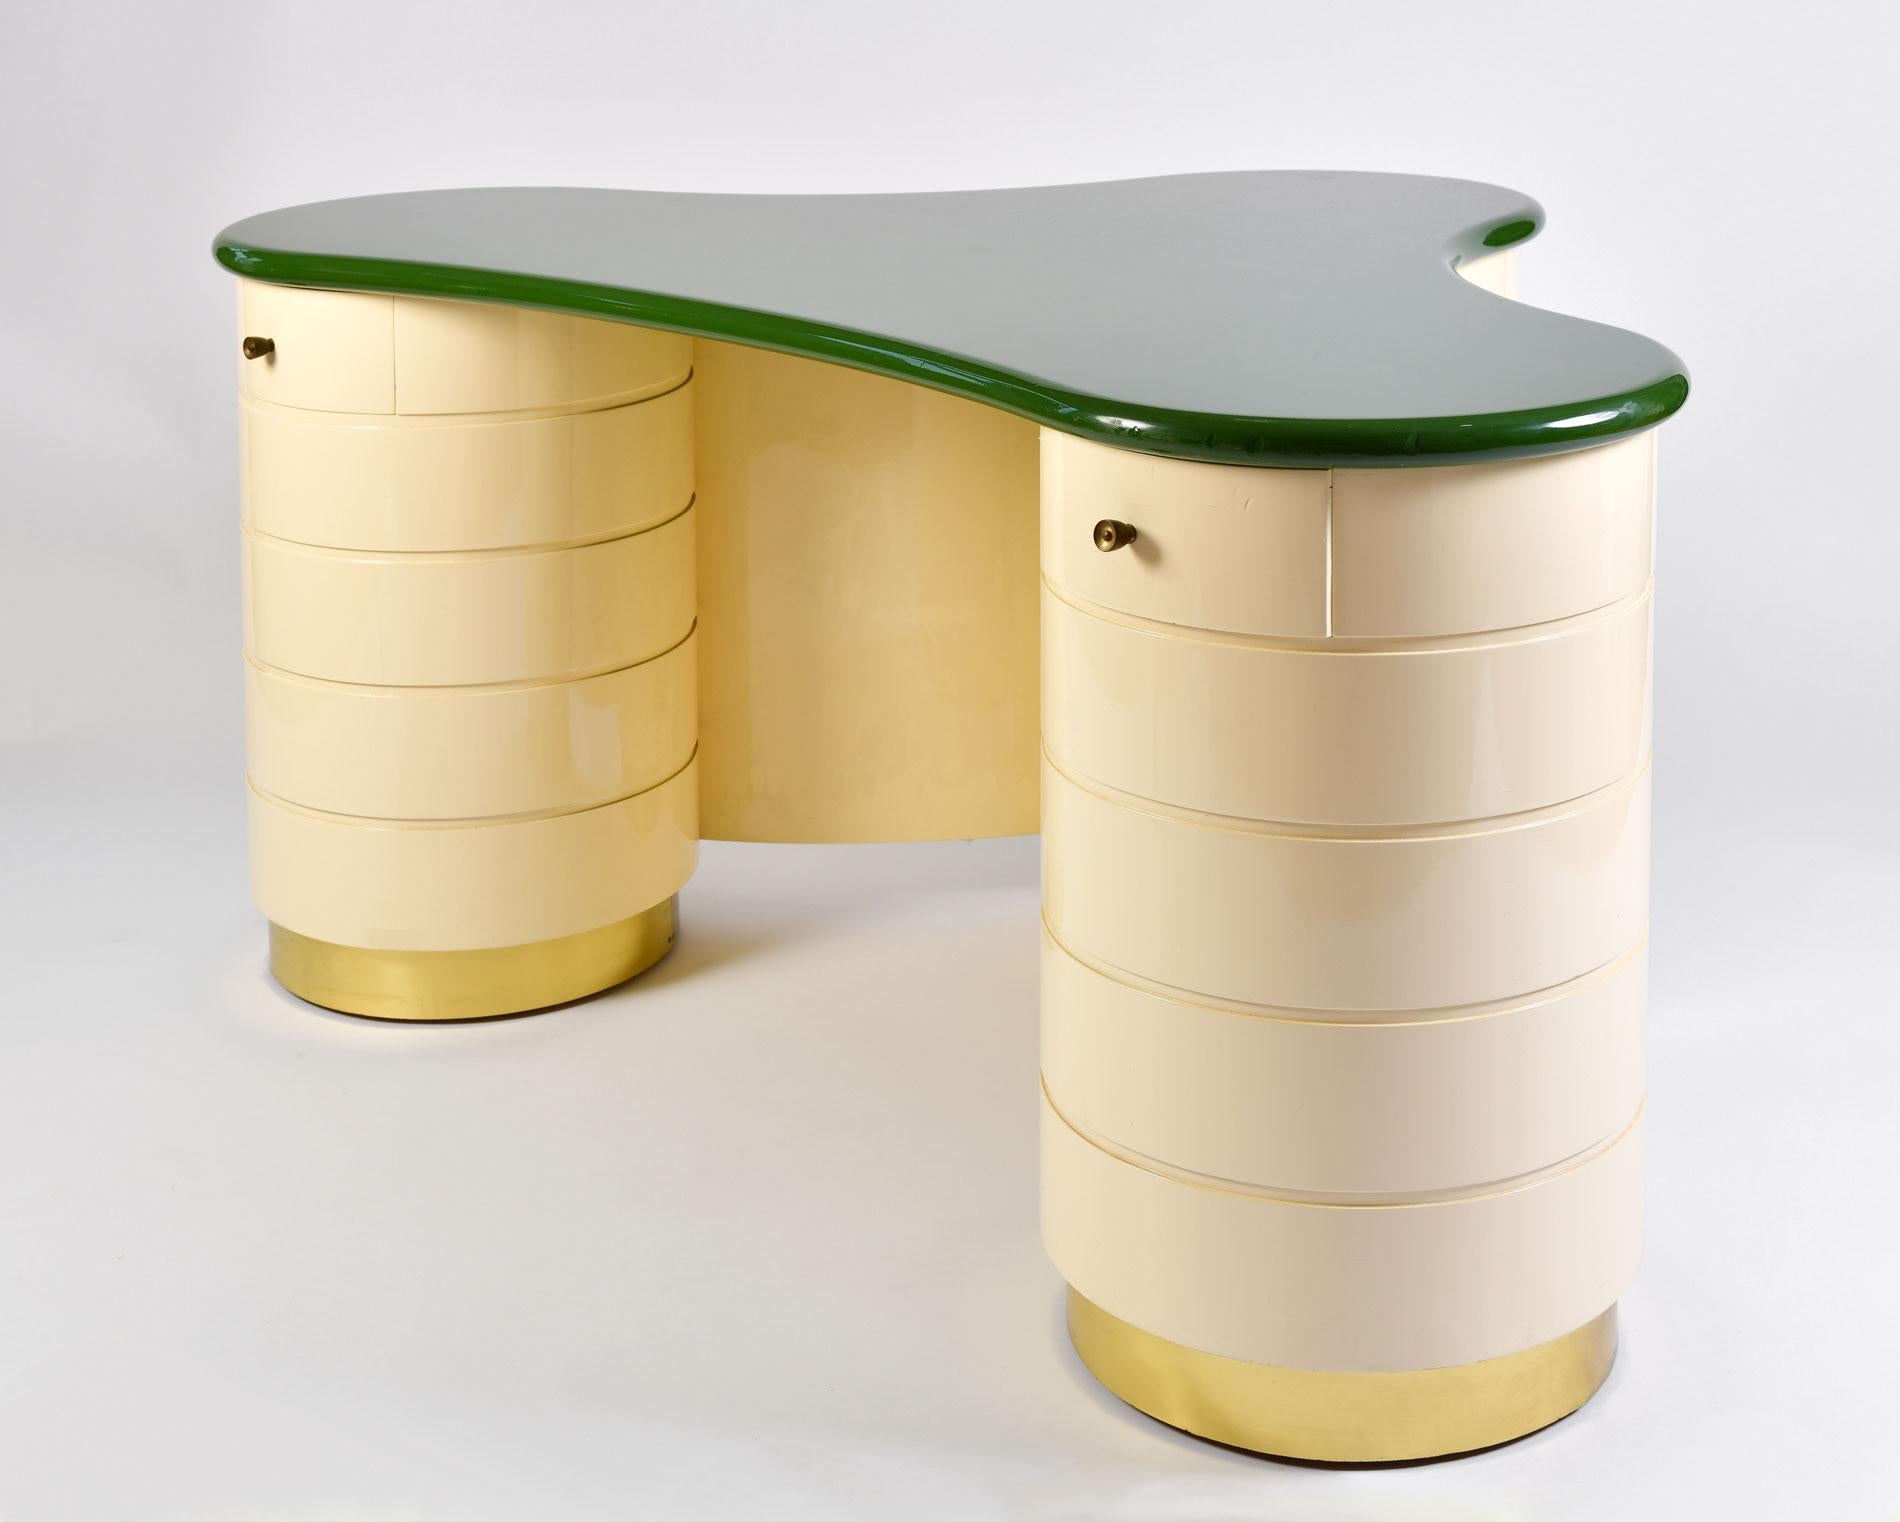 Ultra glamorous dressing-table/desk in a surrealist deco style. Three large cream lacquered circular pillars each with their own-drawer stand on brass supports. In contrast a generous lacquered green top completes the dramatic effect.